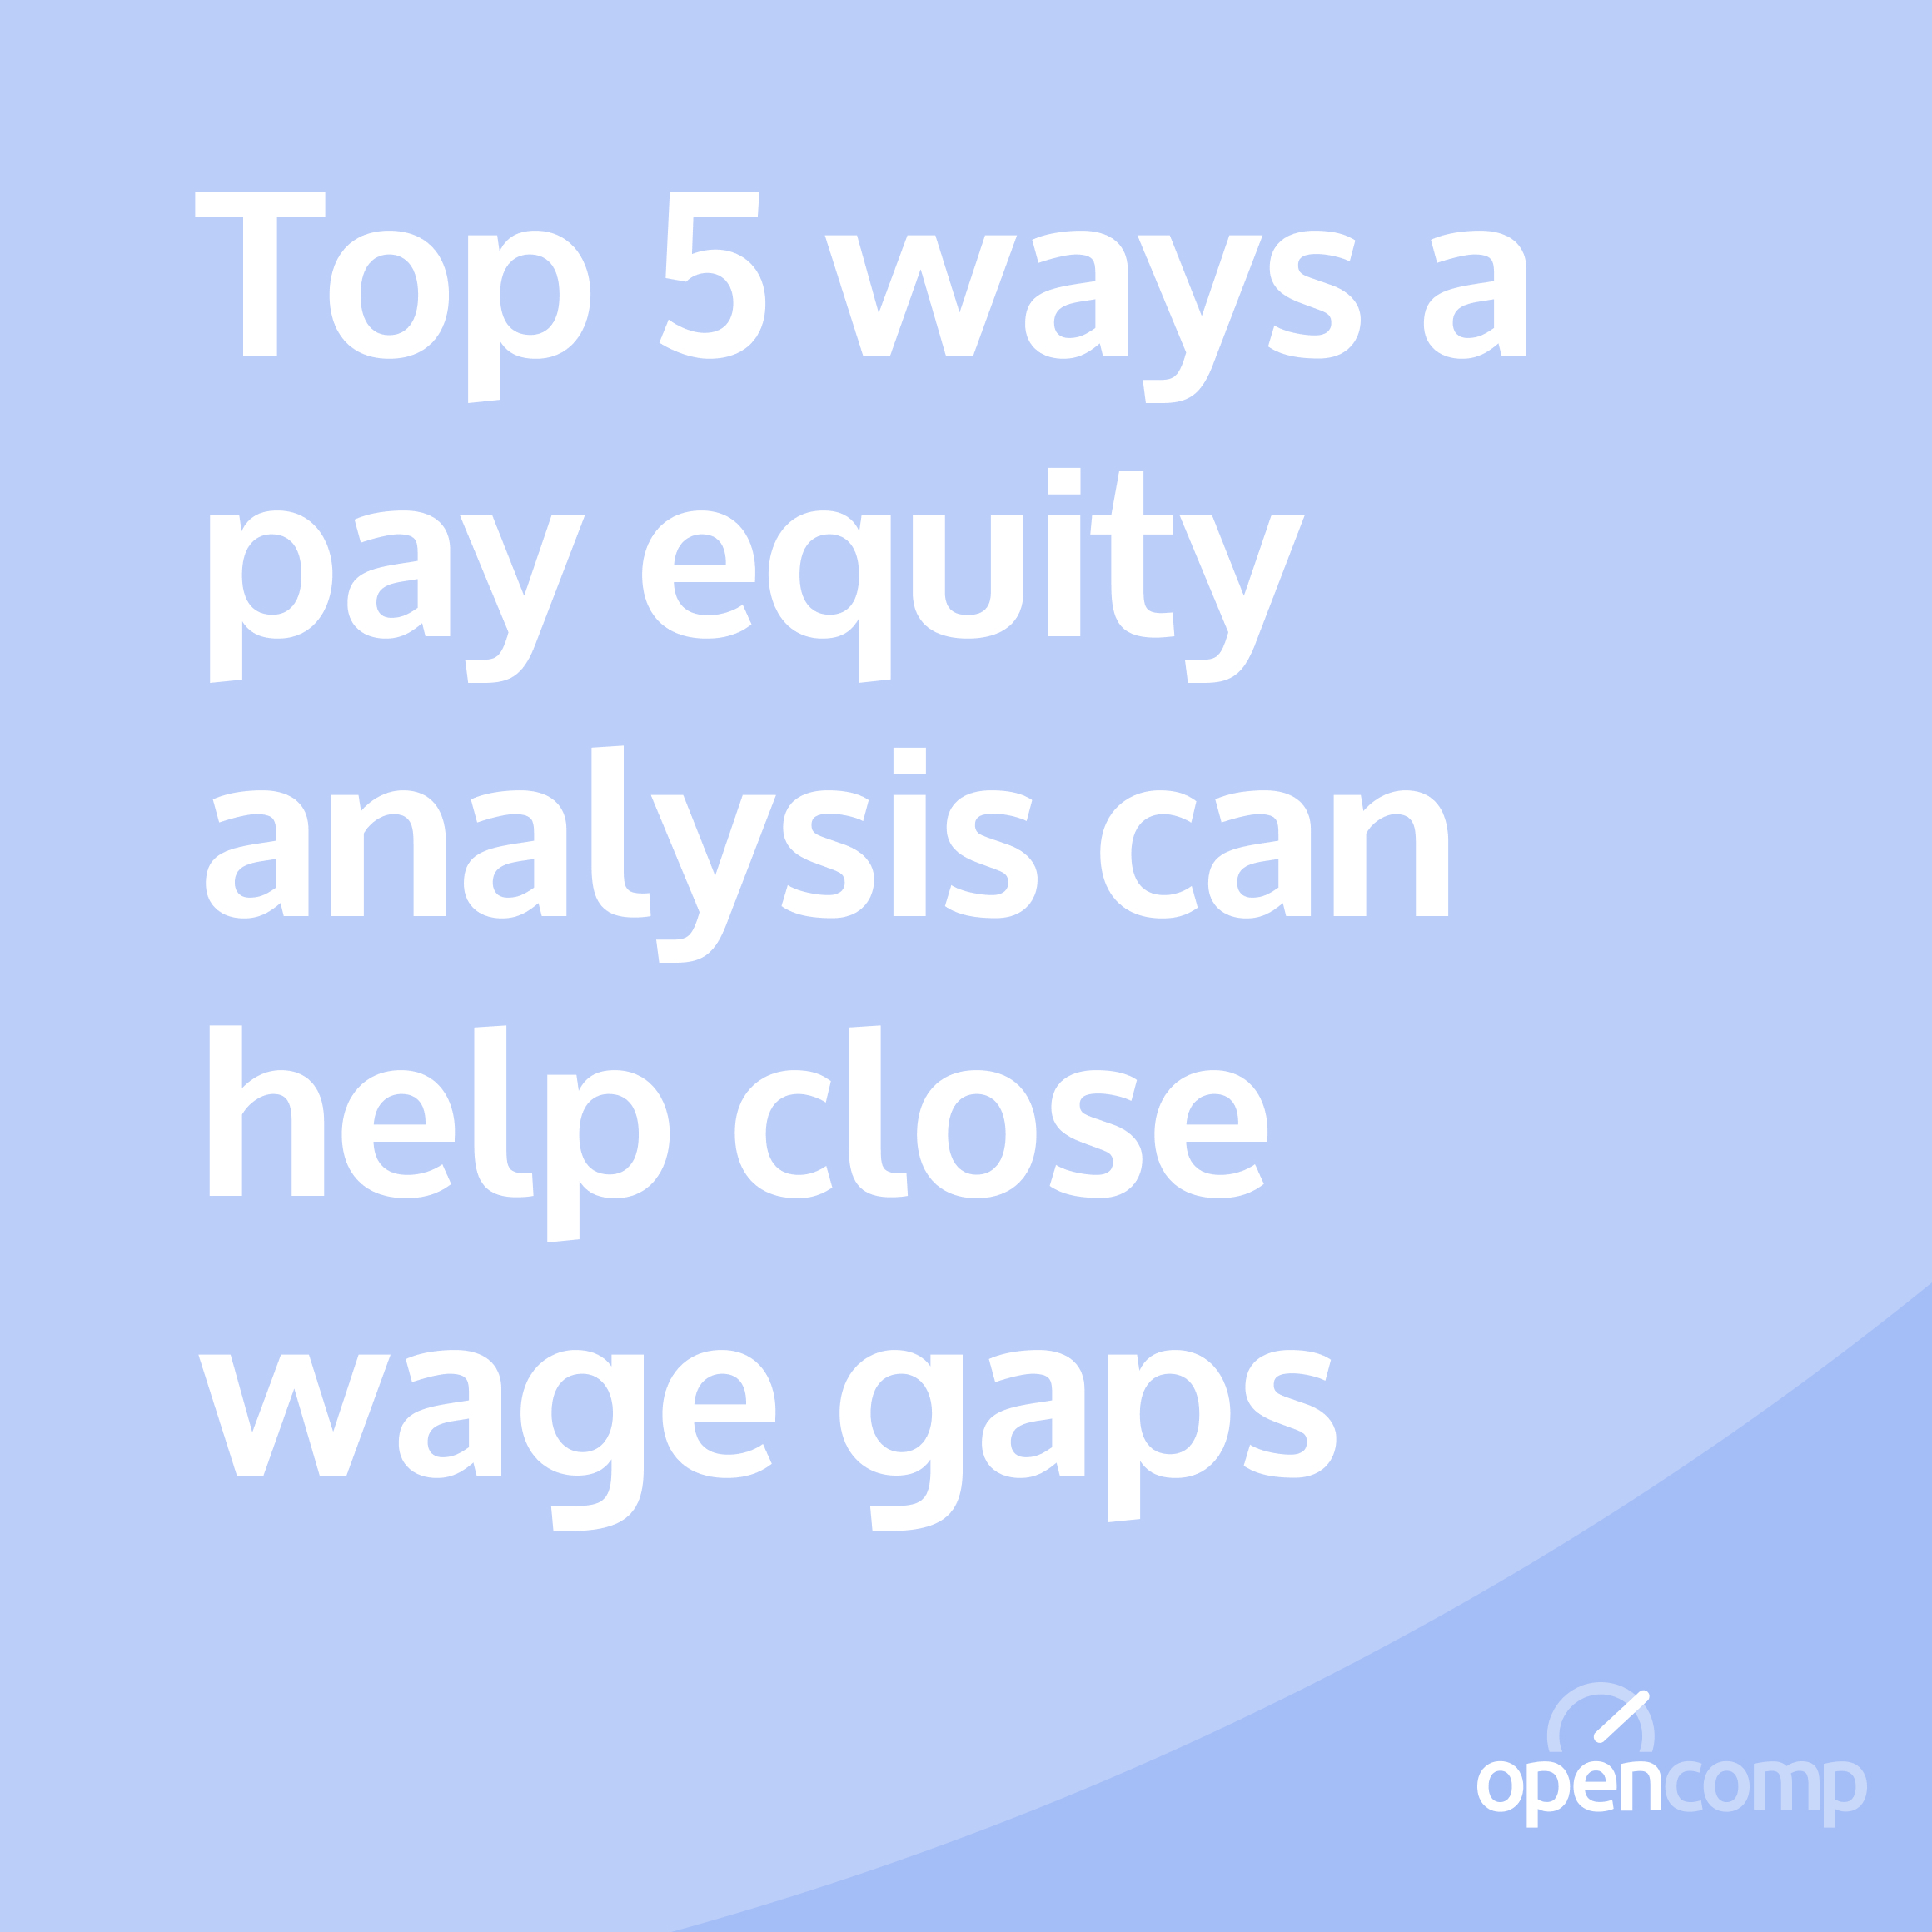 Top 5 ways a pay equity analysis can help close wage gaps